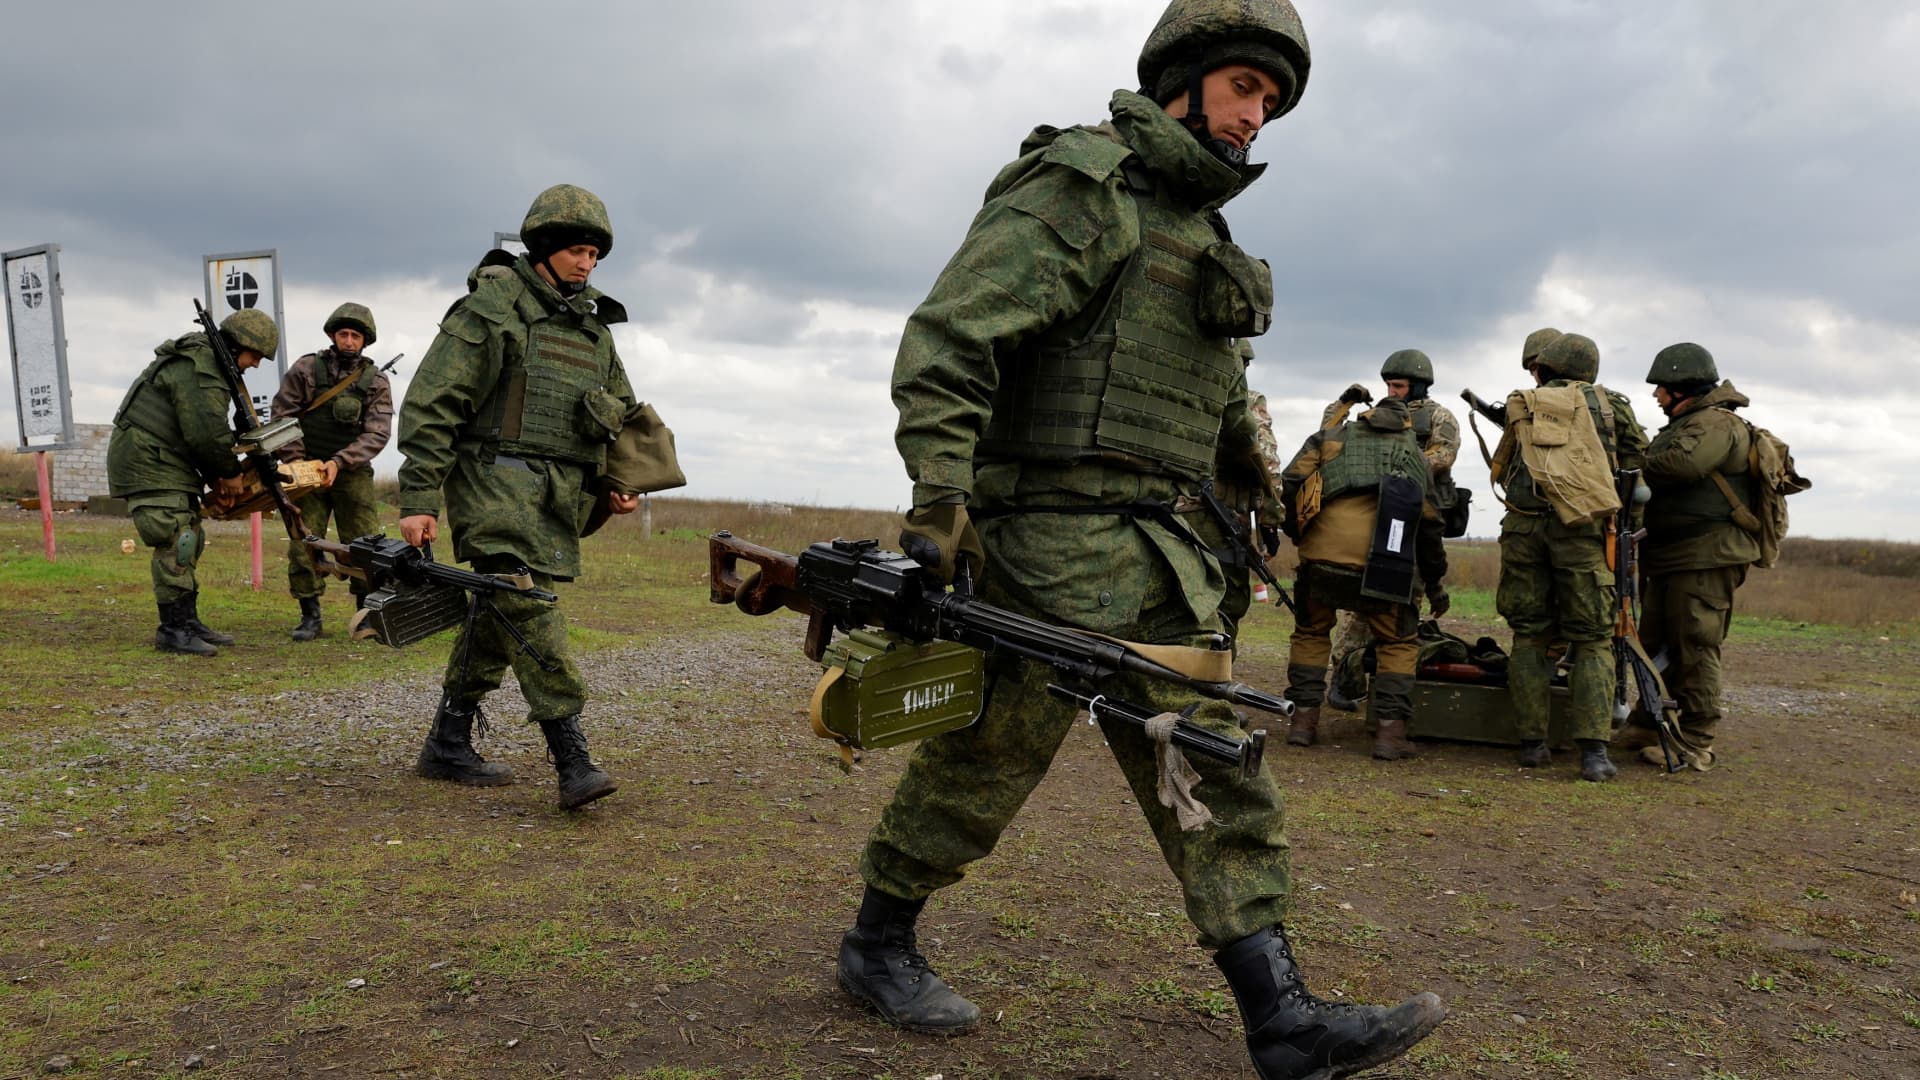 Russian newly-mobilized reservists train at a shooting range in the course of Russia-Ukraine conflict in the Donetsk region, Russian-controlled Ukraine, October 10, 2022.